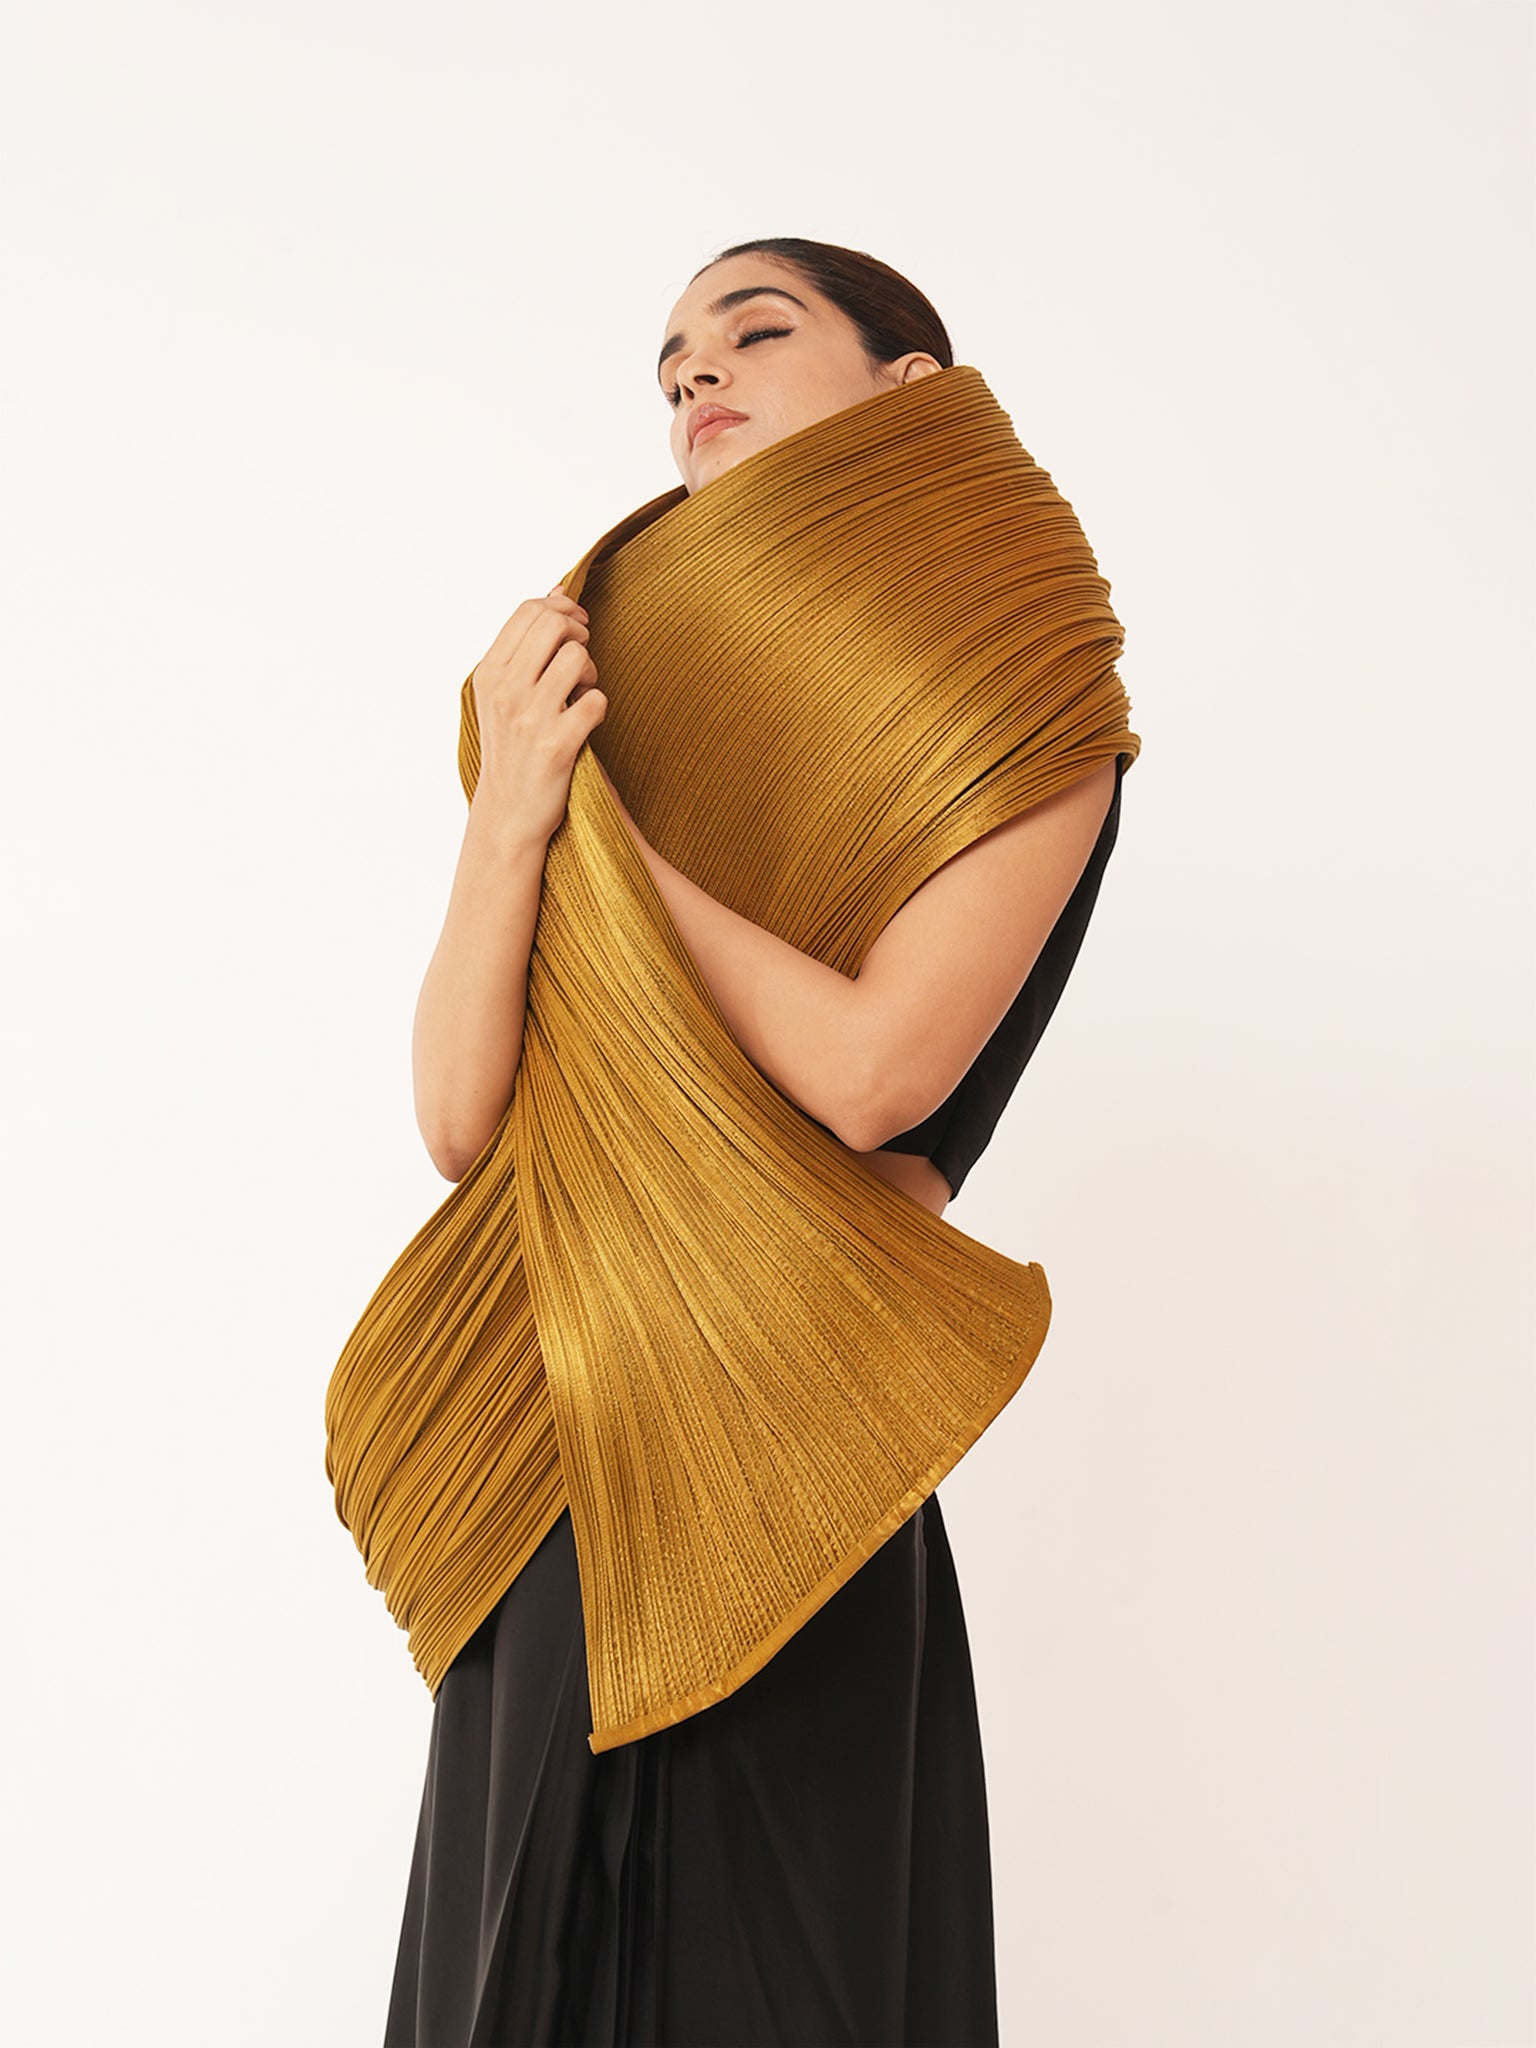 Molten Concept Saree In Black And Gold